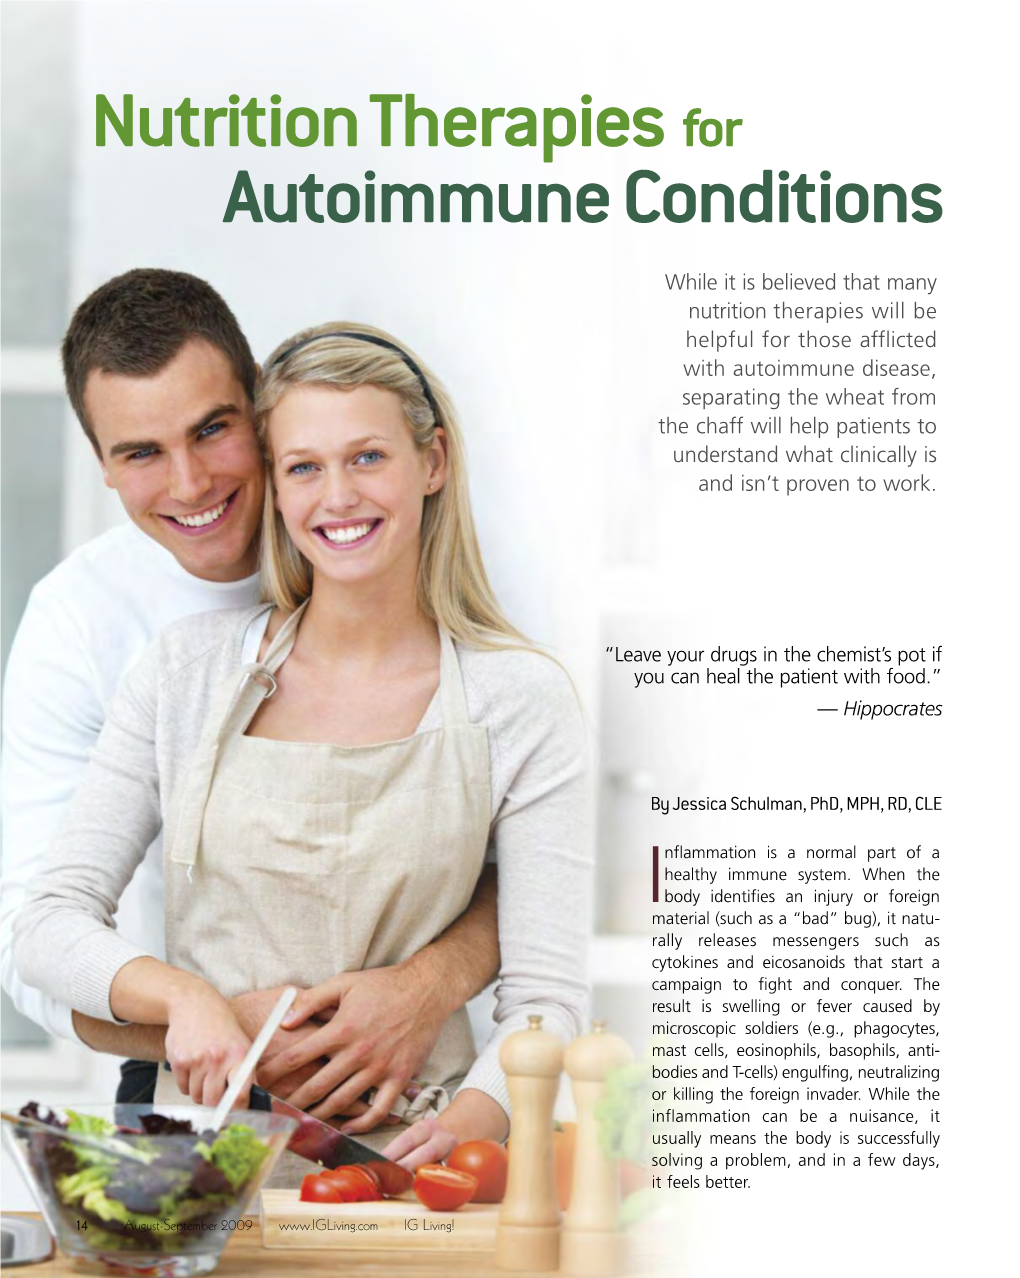 Nutrition Therapies for Autoimmune Conditions